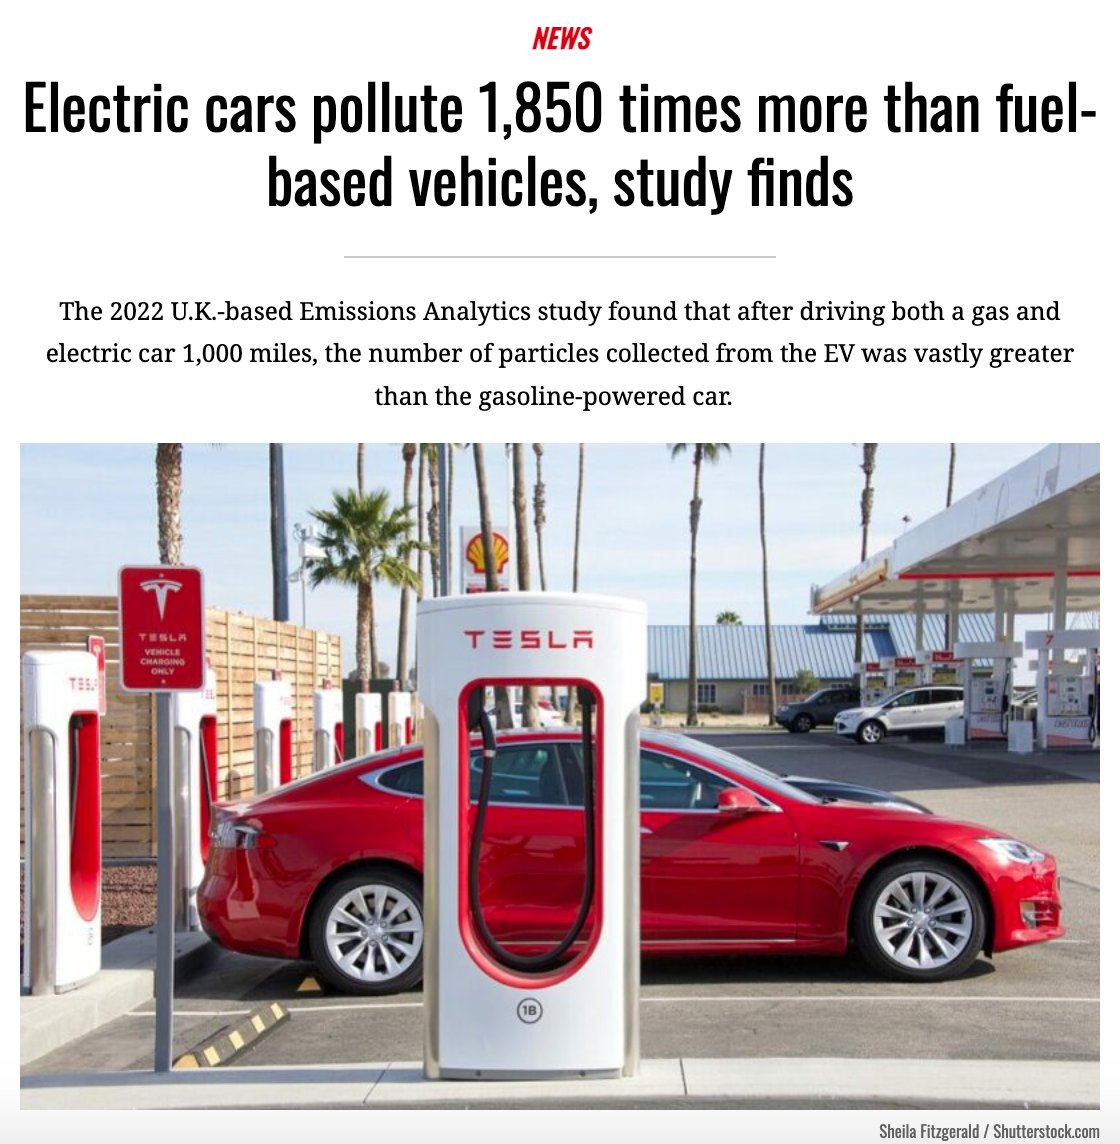 Electric cars pollute 1,850 times more than fuel-based vehicles, study finds The 2022 U.K.-based Emissions Analytics study found that after driving both a gas and electric car 1,000 miles, the number of particles collected from the EV was vastly greater than the gasoline-powered